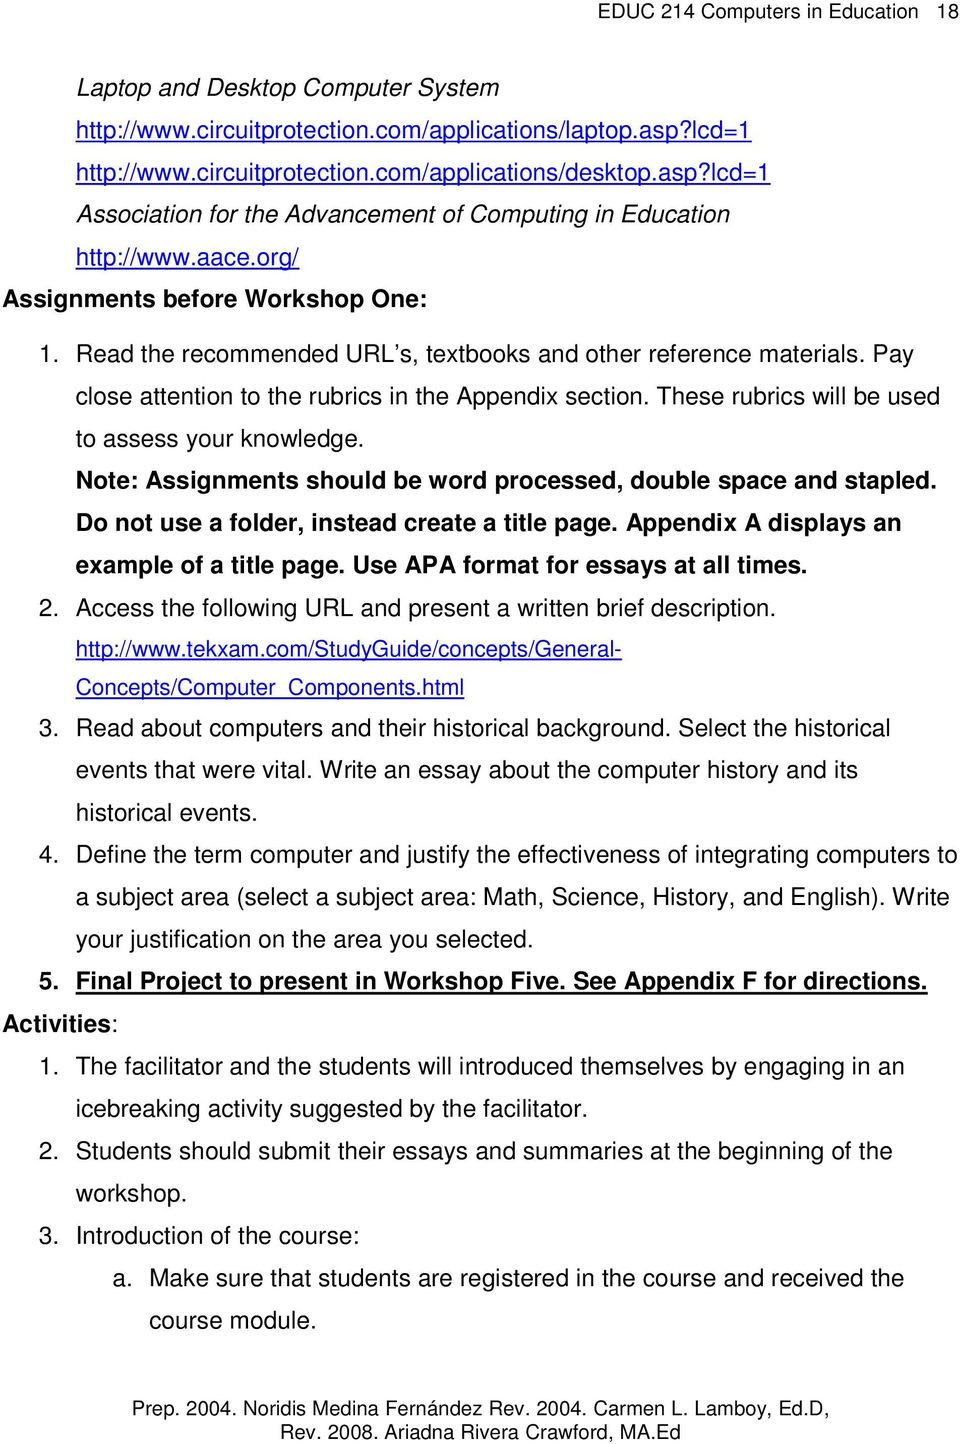 Read the recommended URL s, textbooks and other reference materials. Pay close attention to the rubrics in the Appendix section. These rubrics will be used to assess your knowledge.